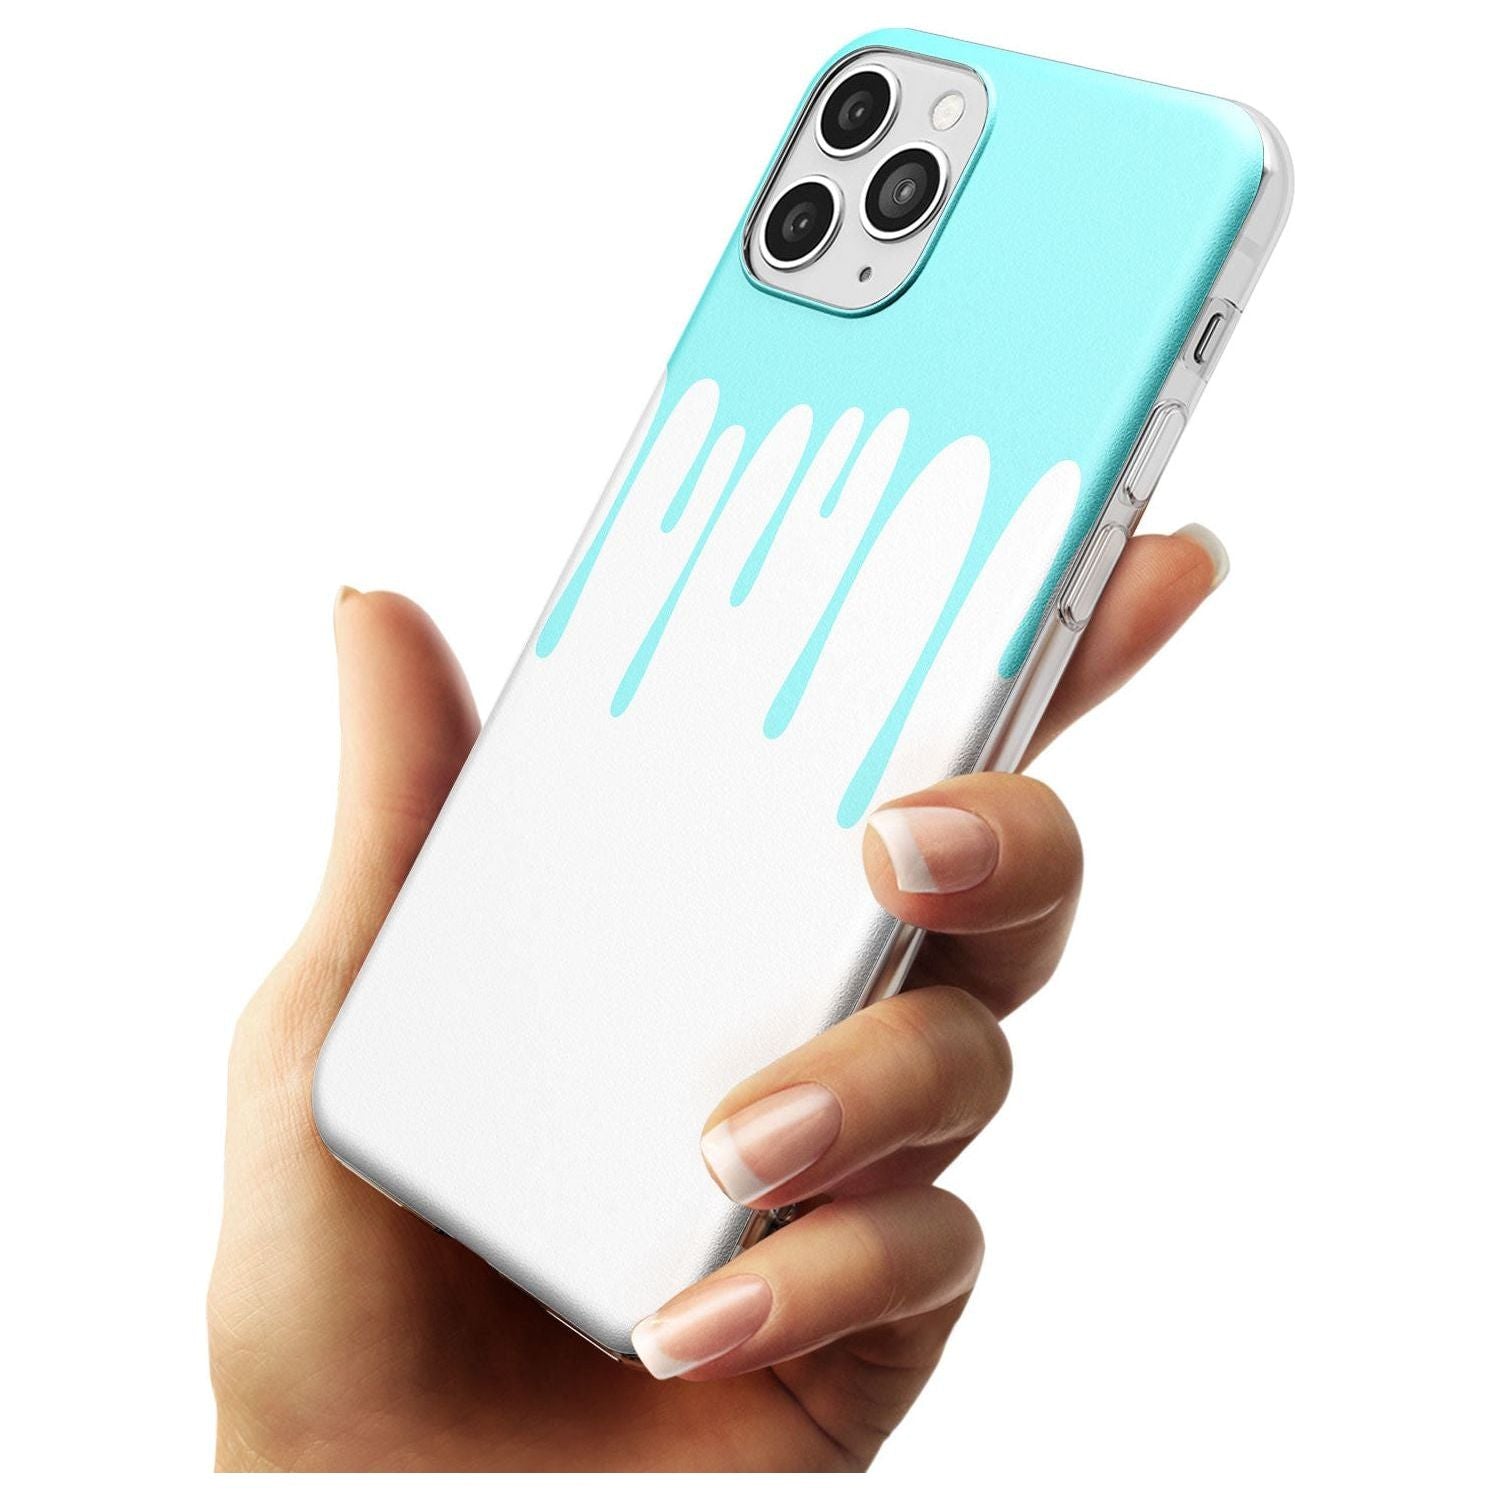 Melted Effect: Teal & White iPhone Case Slim TPU Phone Case Warehouse 11 Pro Max